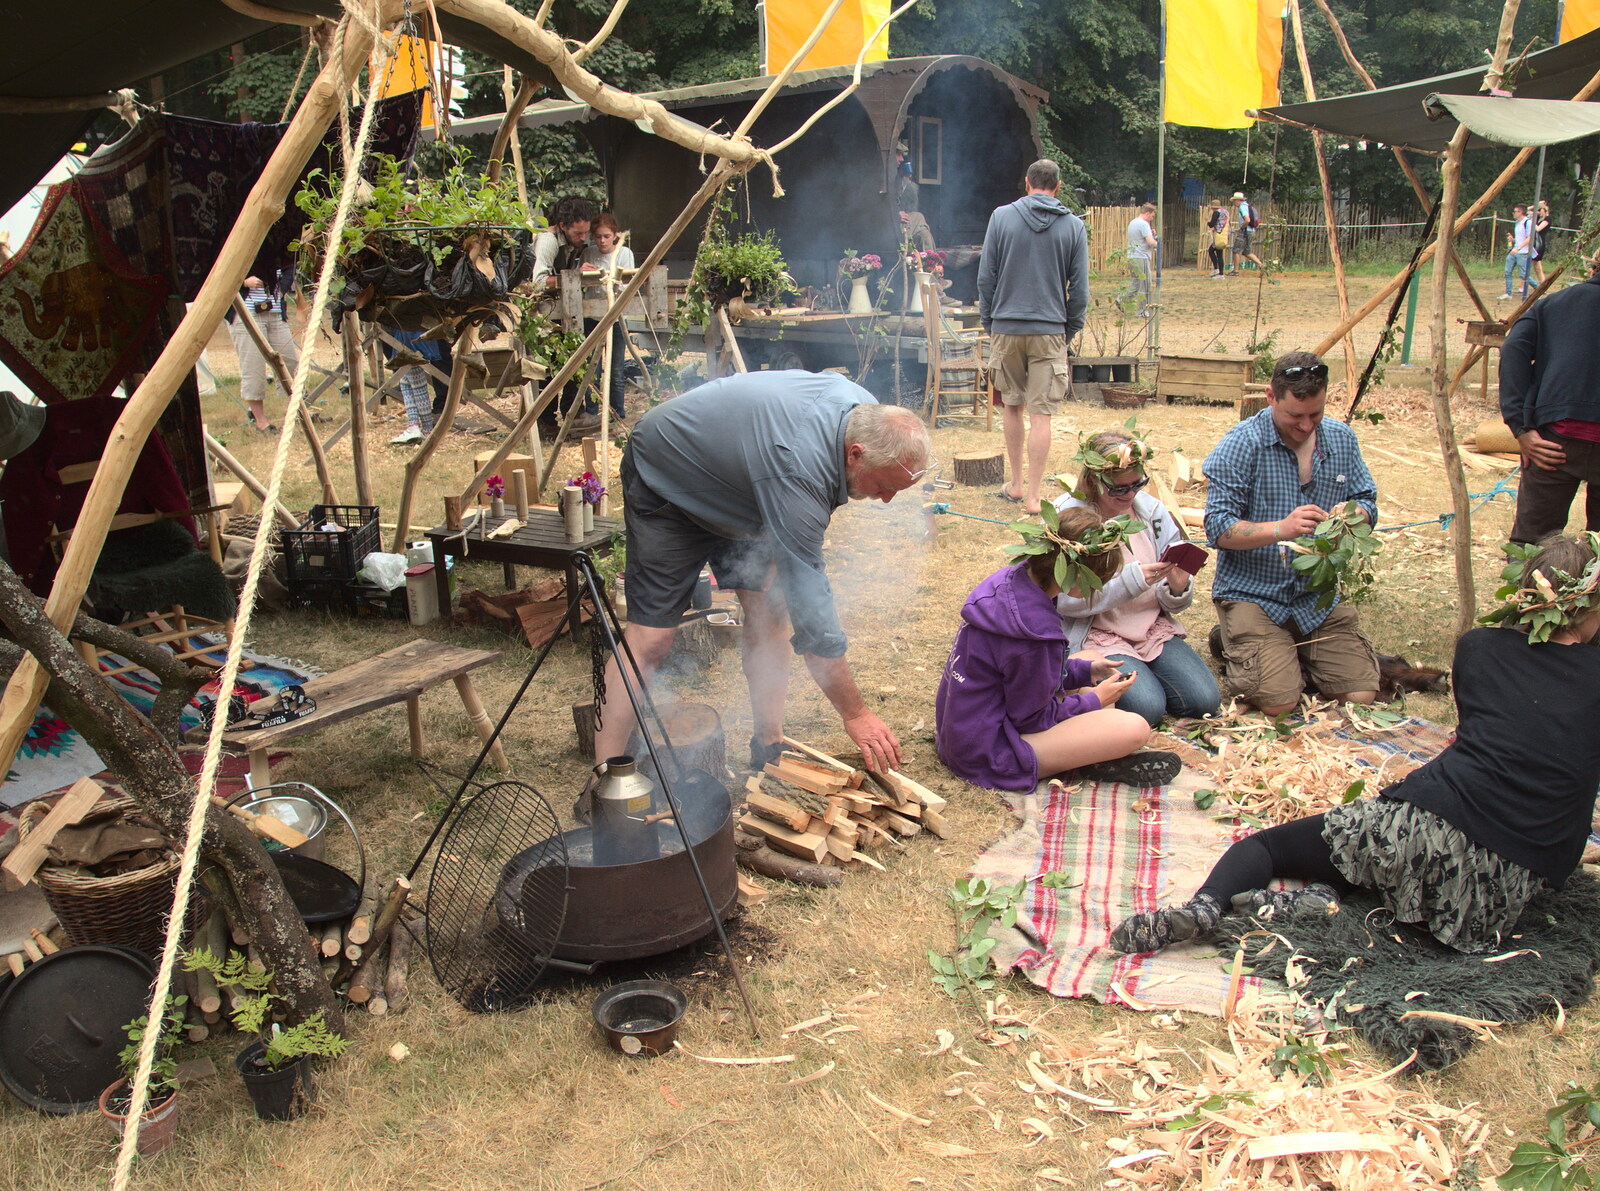 Boiling pots and bushcraft from The 8th Latitude Festival, Henham Park, Southwold, Suffolk - 18th July 2013